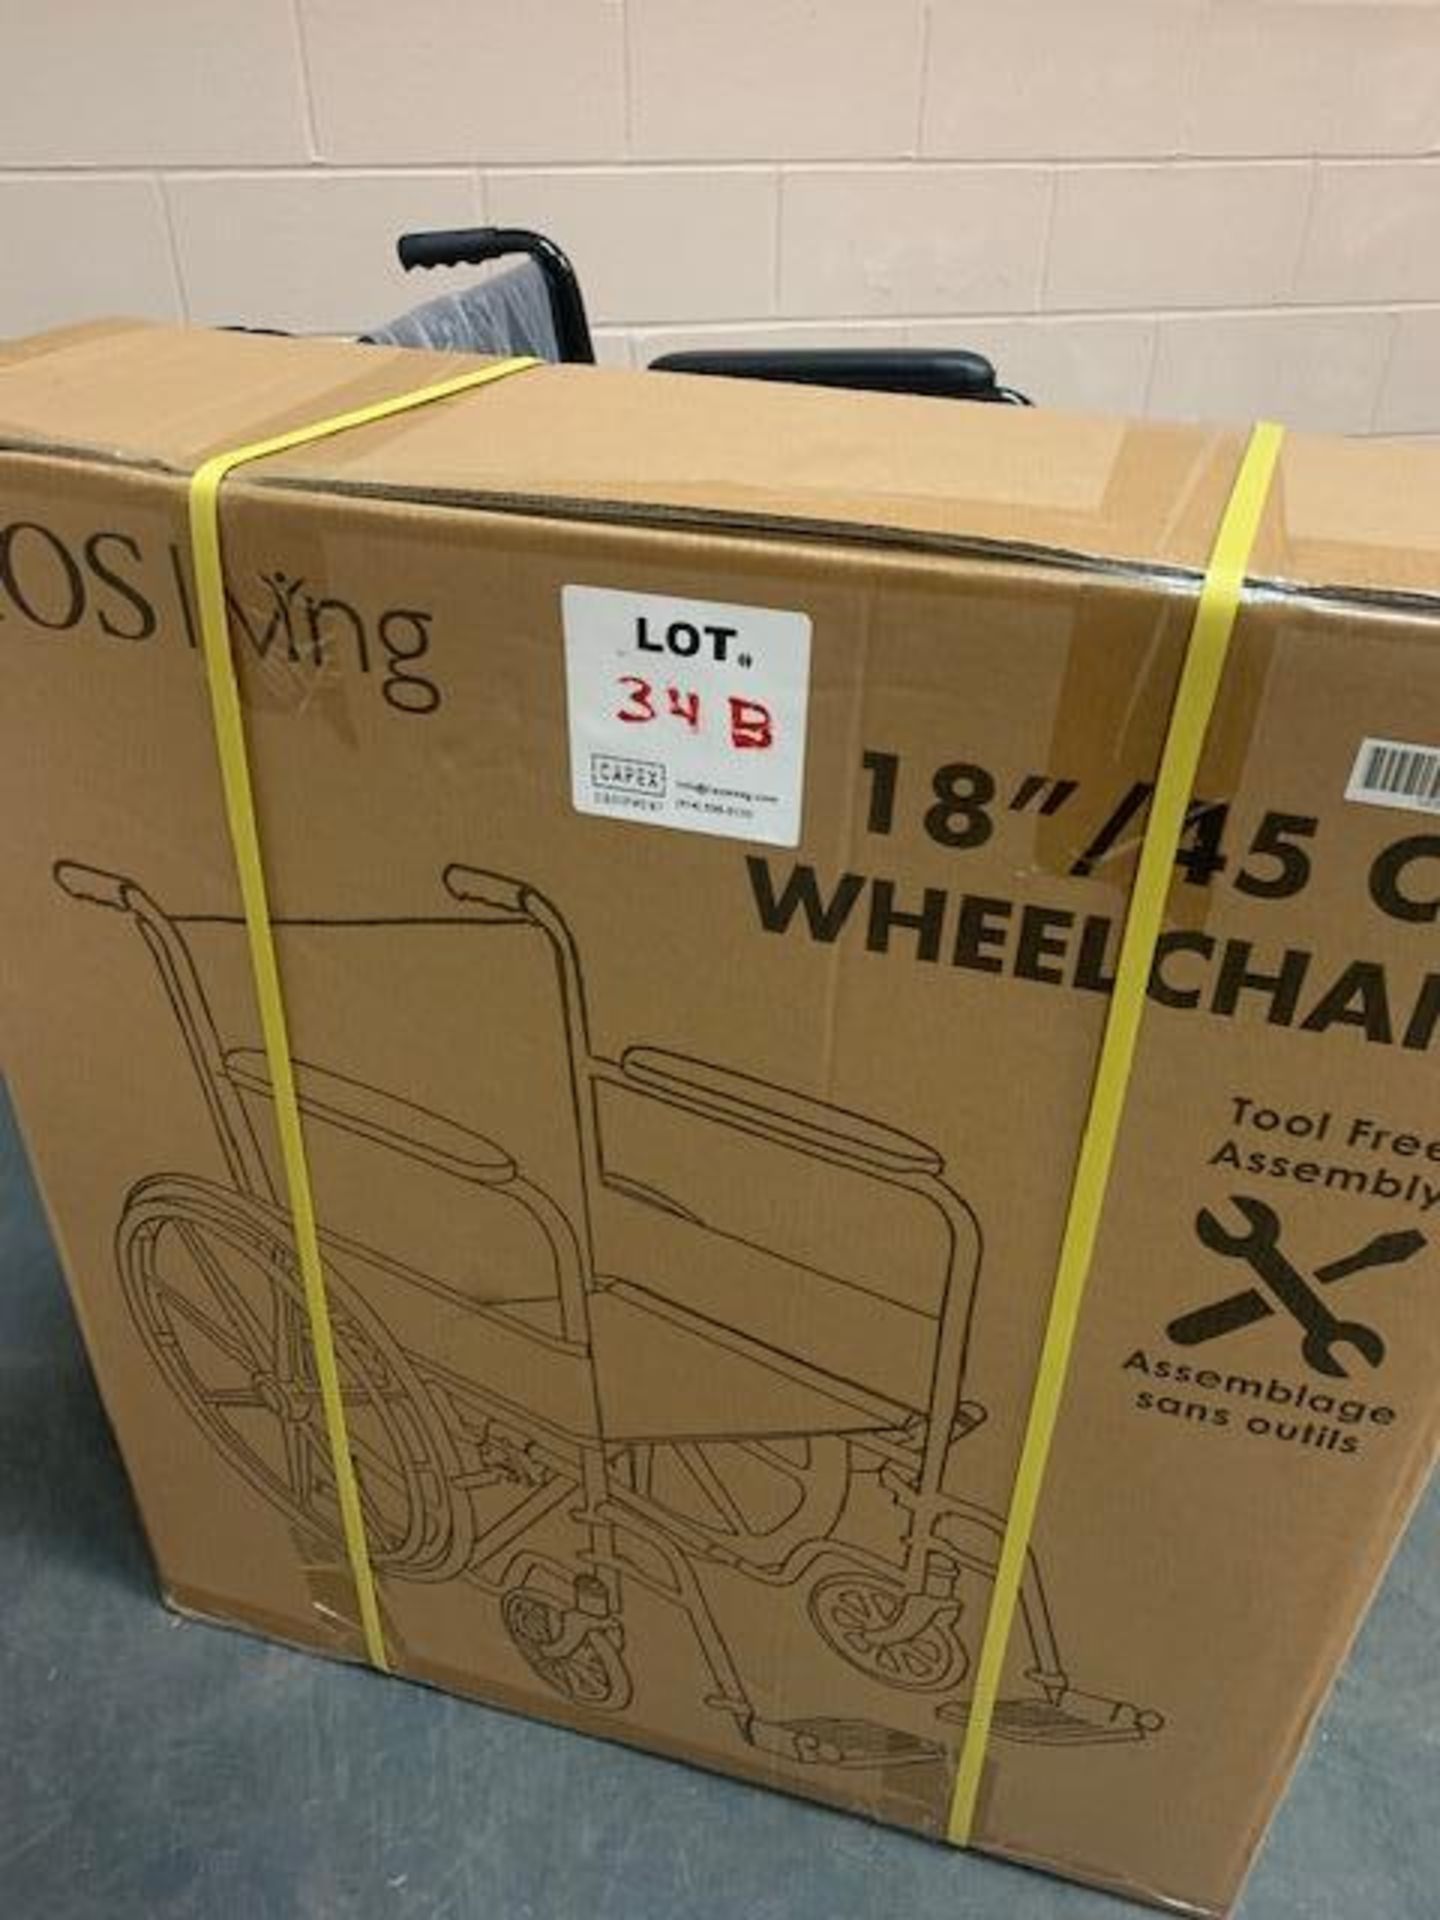 New In Box BIOS Living 18 inch / 45 cm Wheelchair Tool Free Assembly - Image 5 of 6